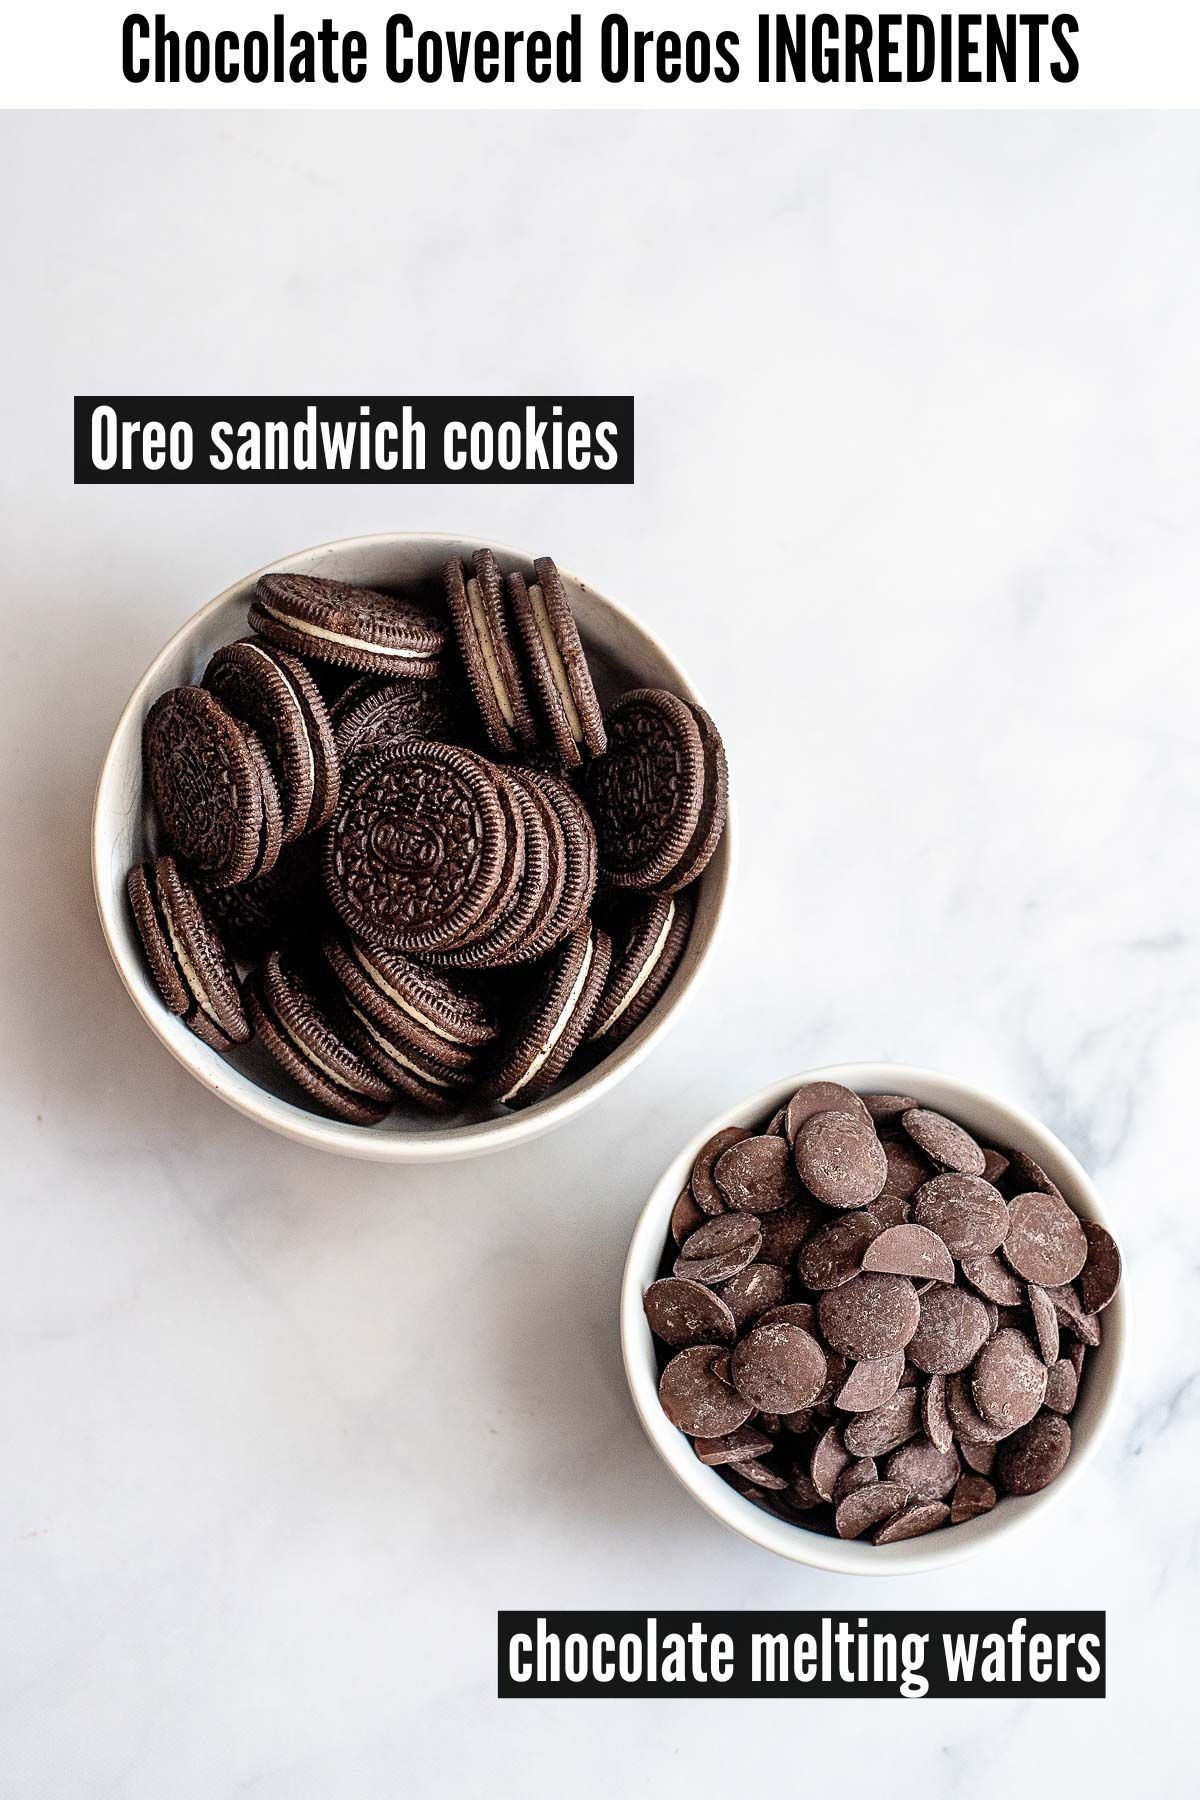 chocolate covered oreos labelled ingredients.